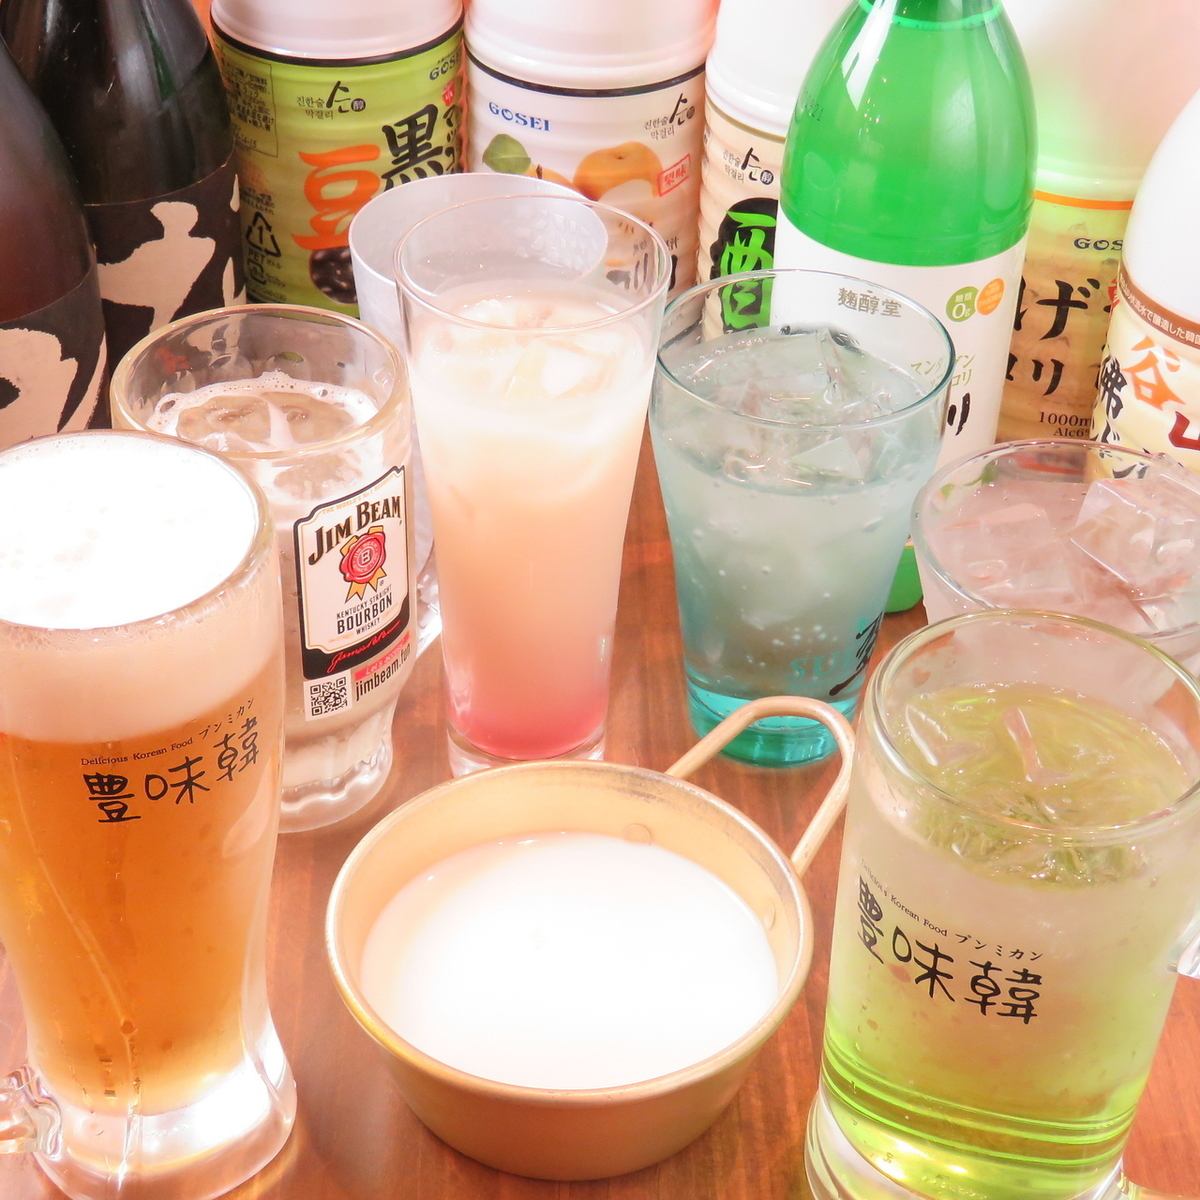 There is also an all-you-can-drink option! As much Korean food as you like♪